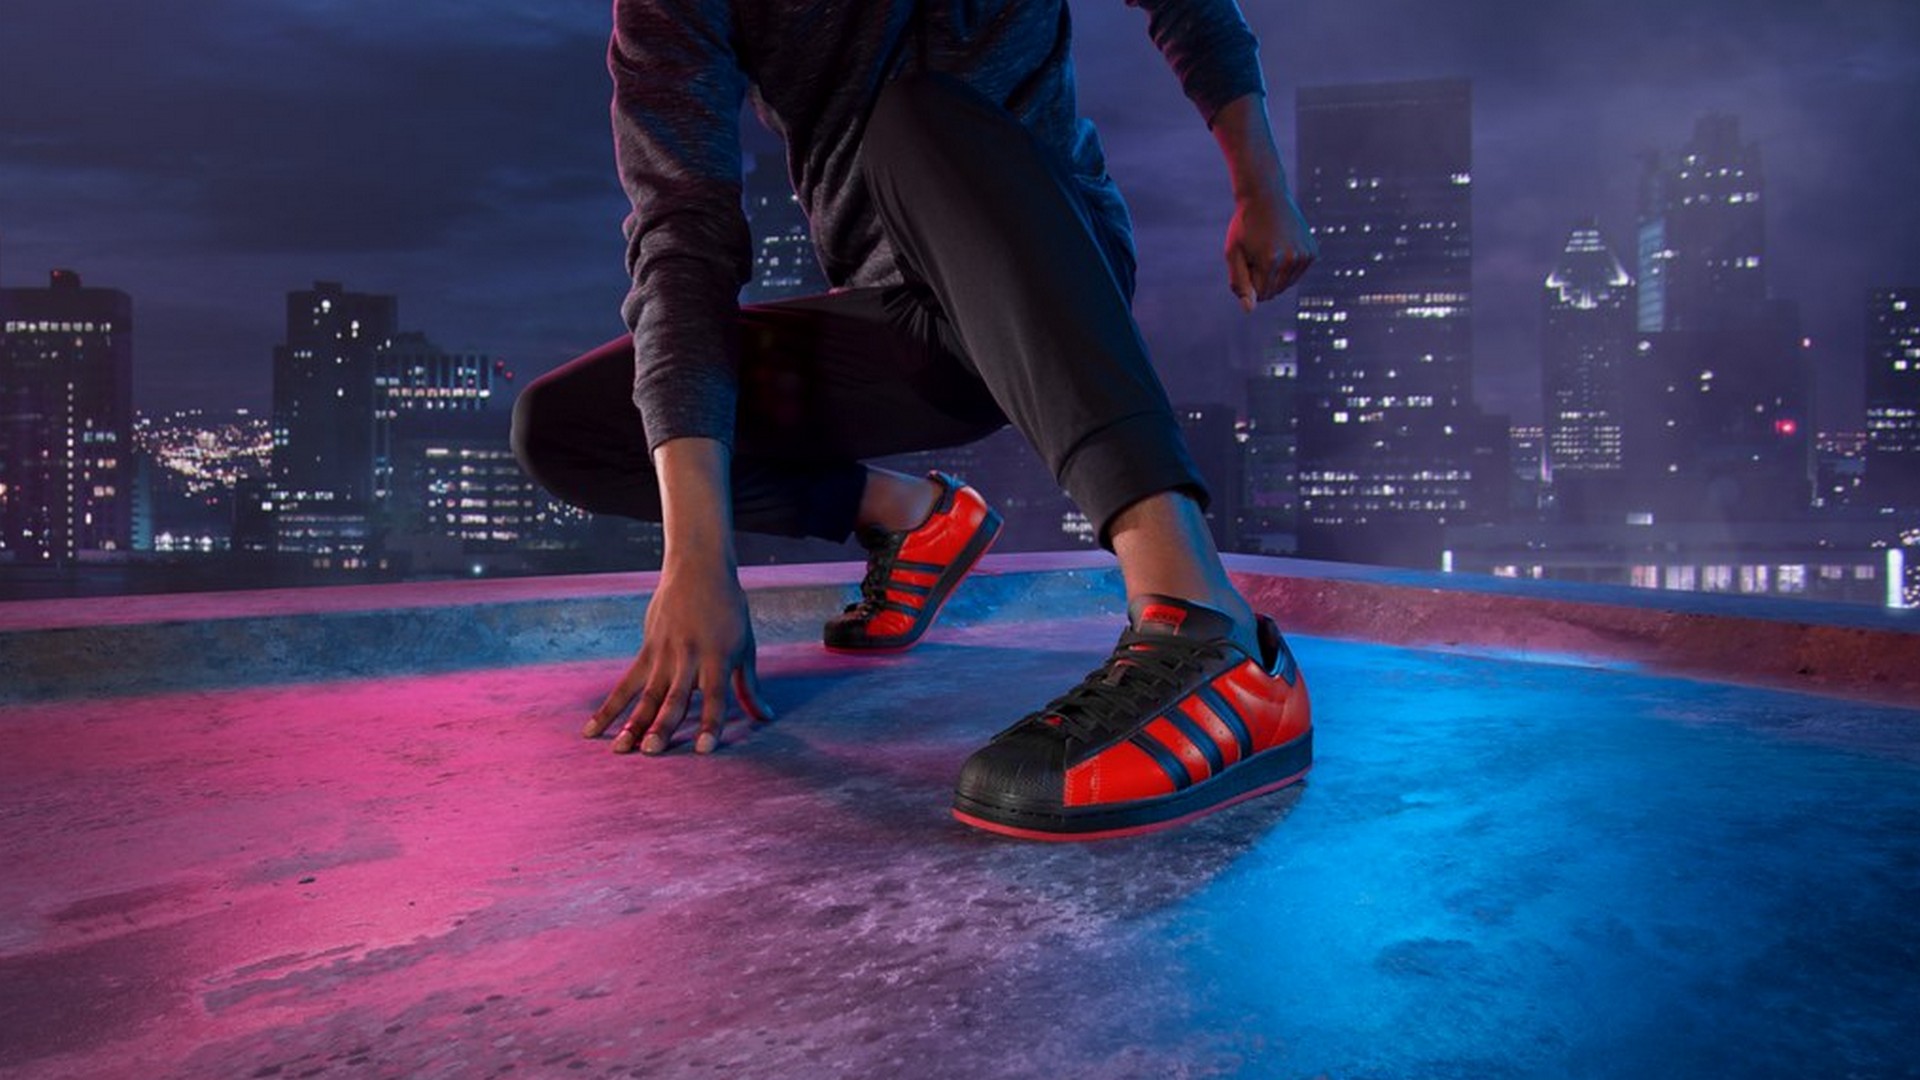 PlayStation Announces Adidas x Marvel’s Spider-Man: Miles Morales Collaboration – PlayStation Reveals Marvel’s Spider-Man Launch Trailer